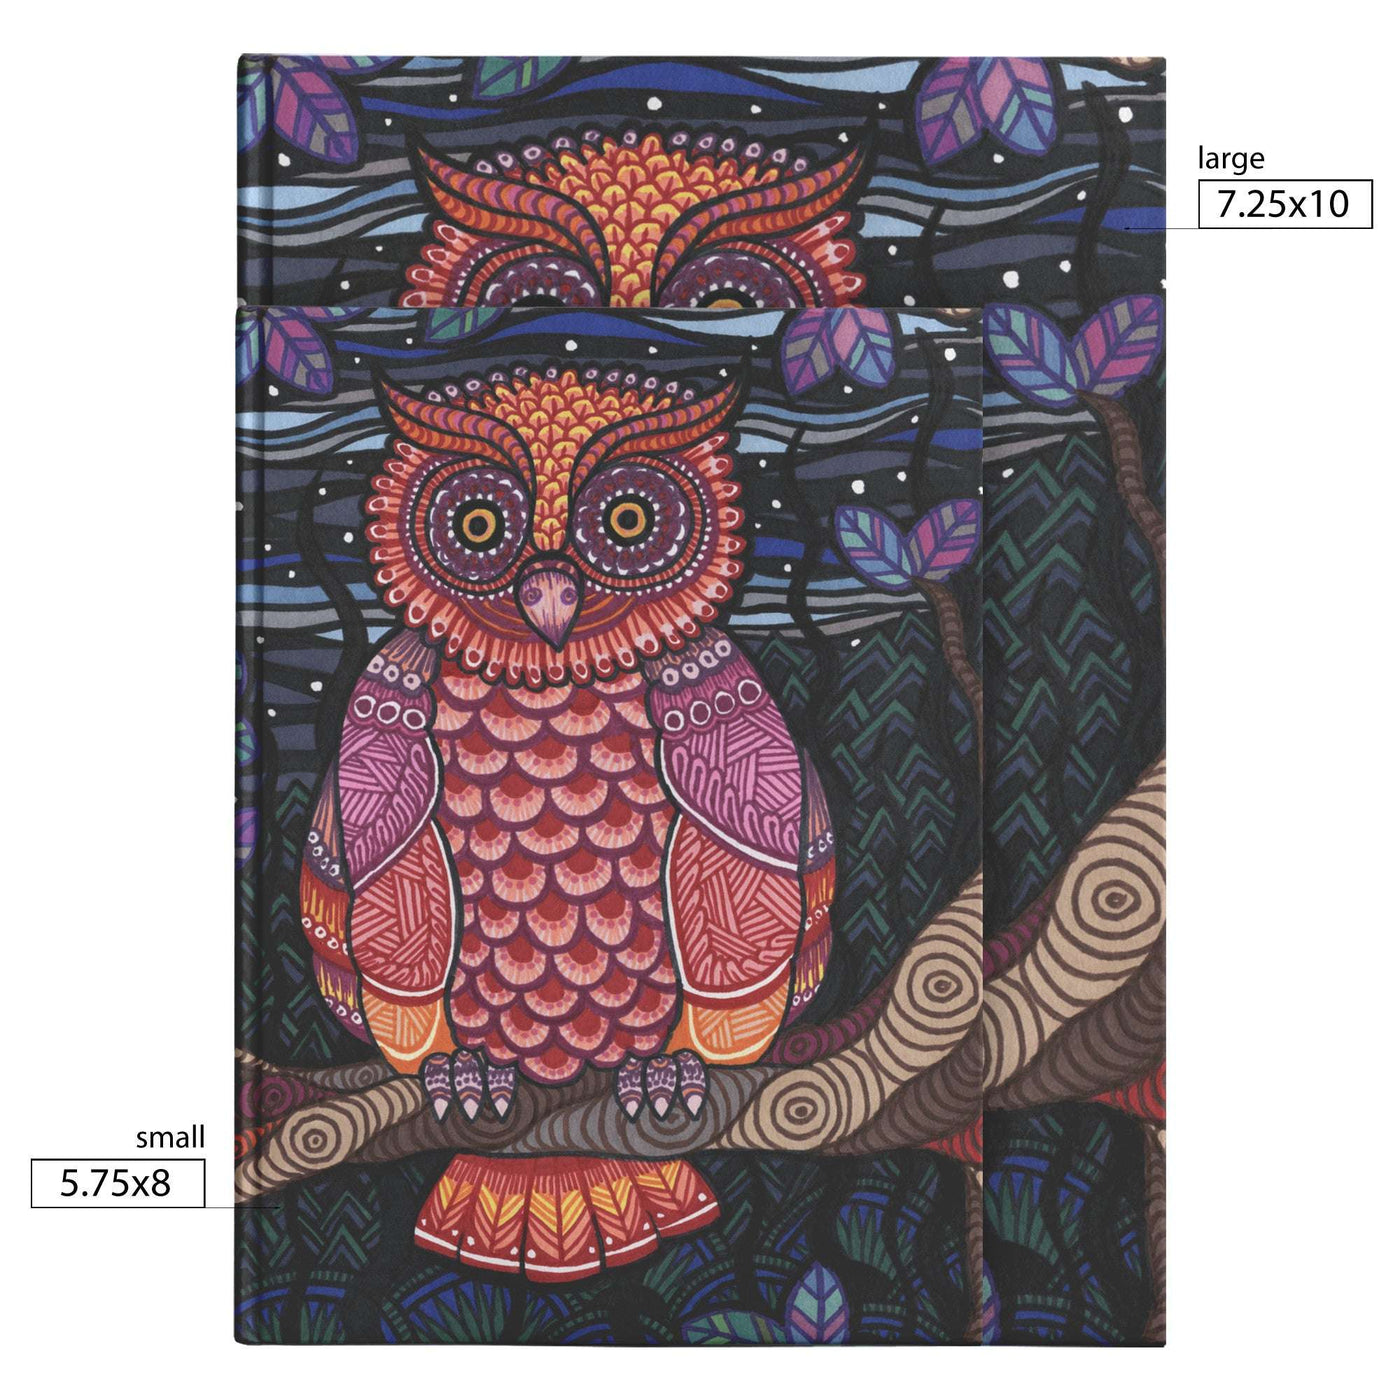 Colorful, intricately patterned Owl Tree Journal illustration on a notebook cover, available in two sizes marked as small and large.